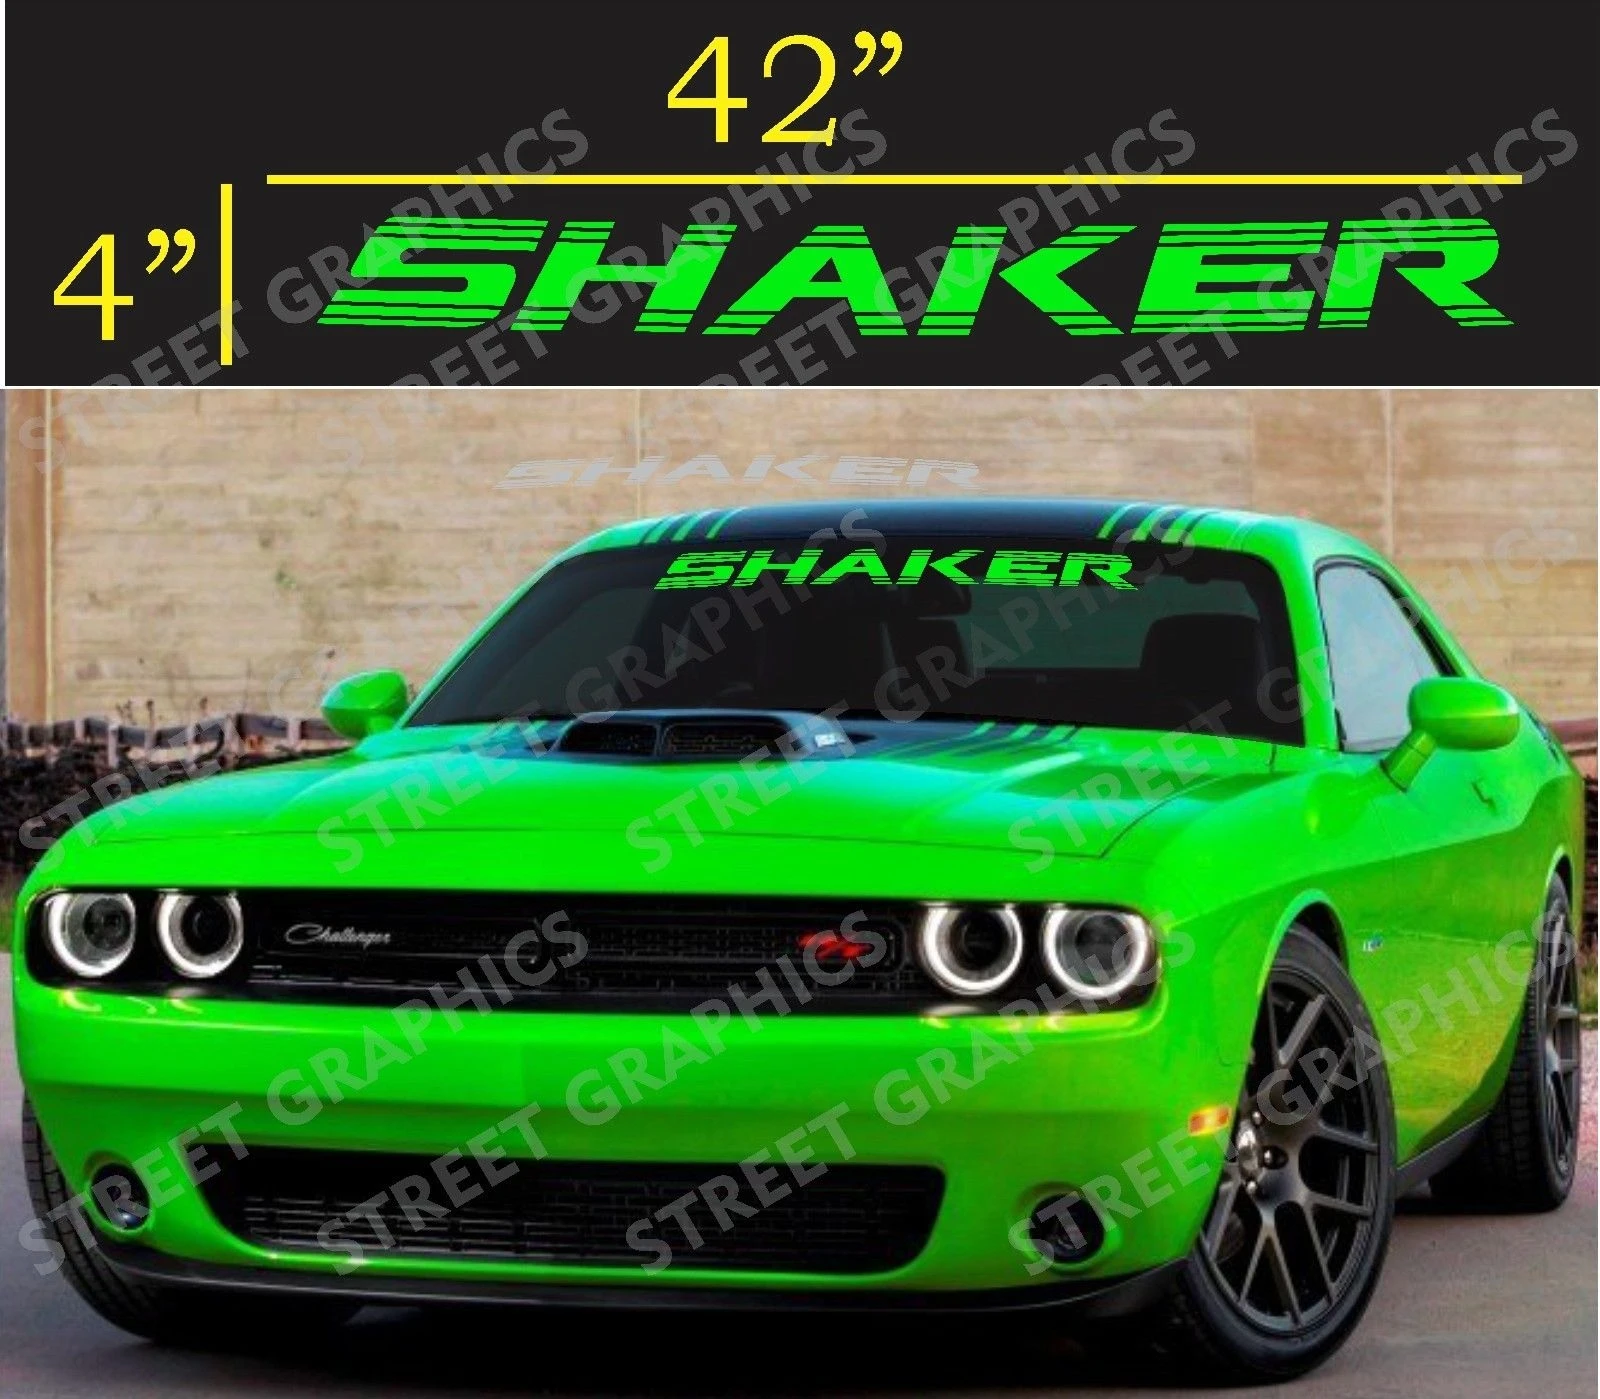 

For DODGE SHAKER WINDSHIELD DECAL STICKERS (LIME )